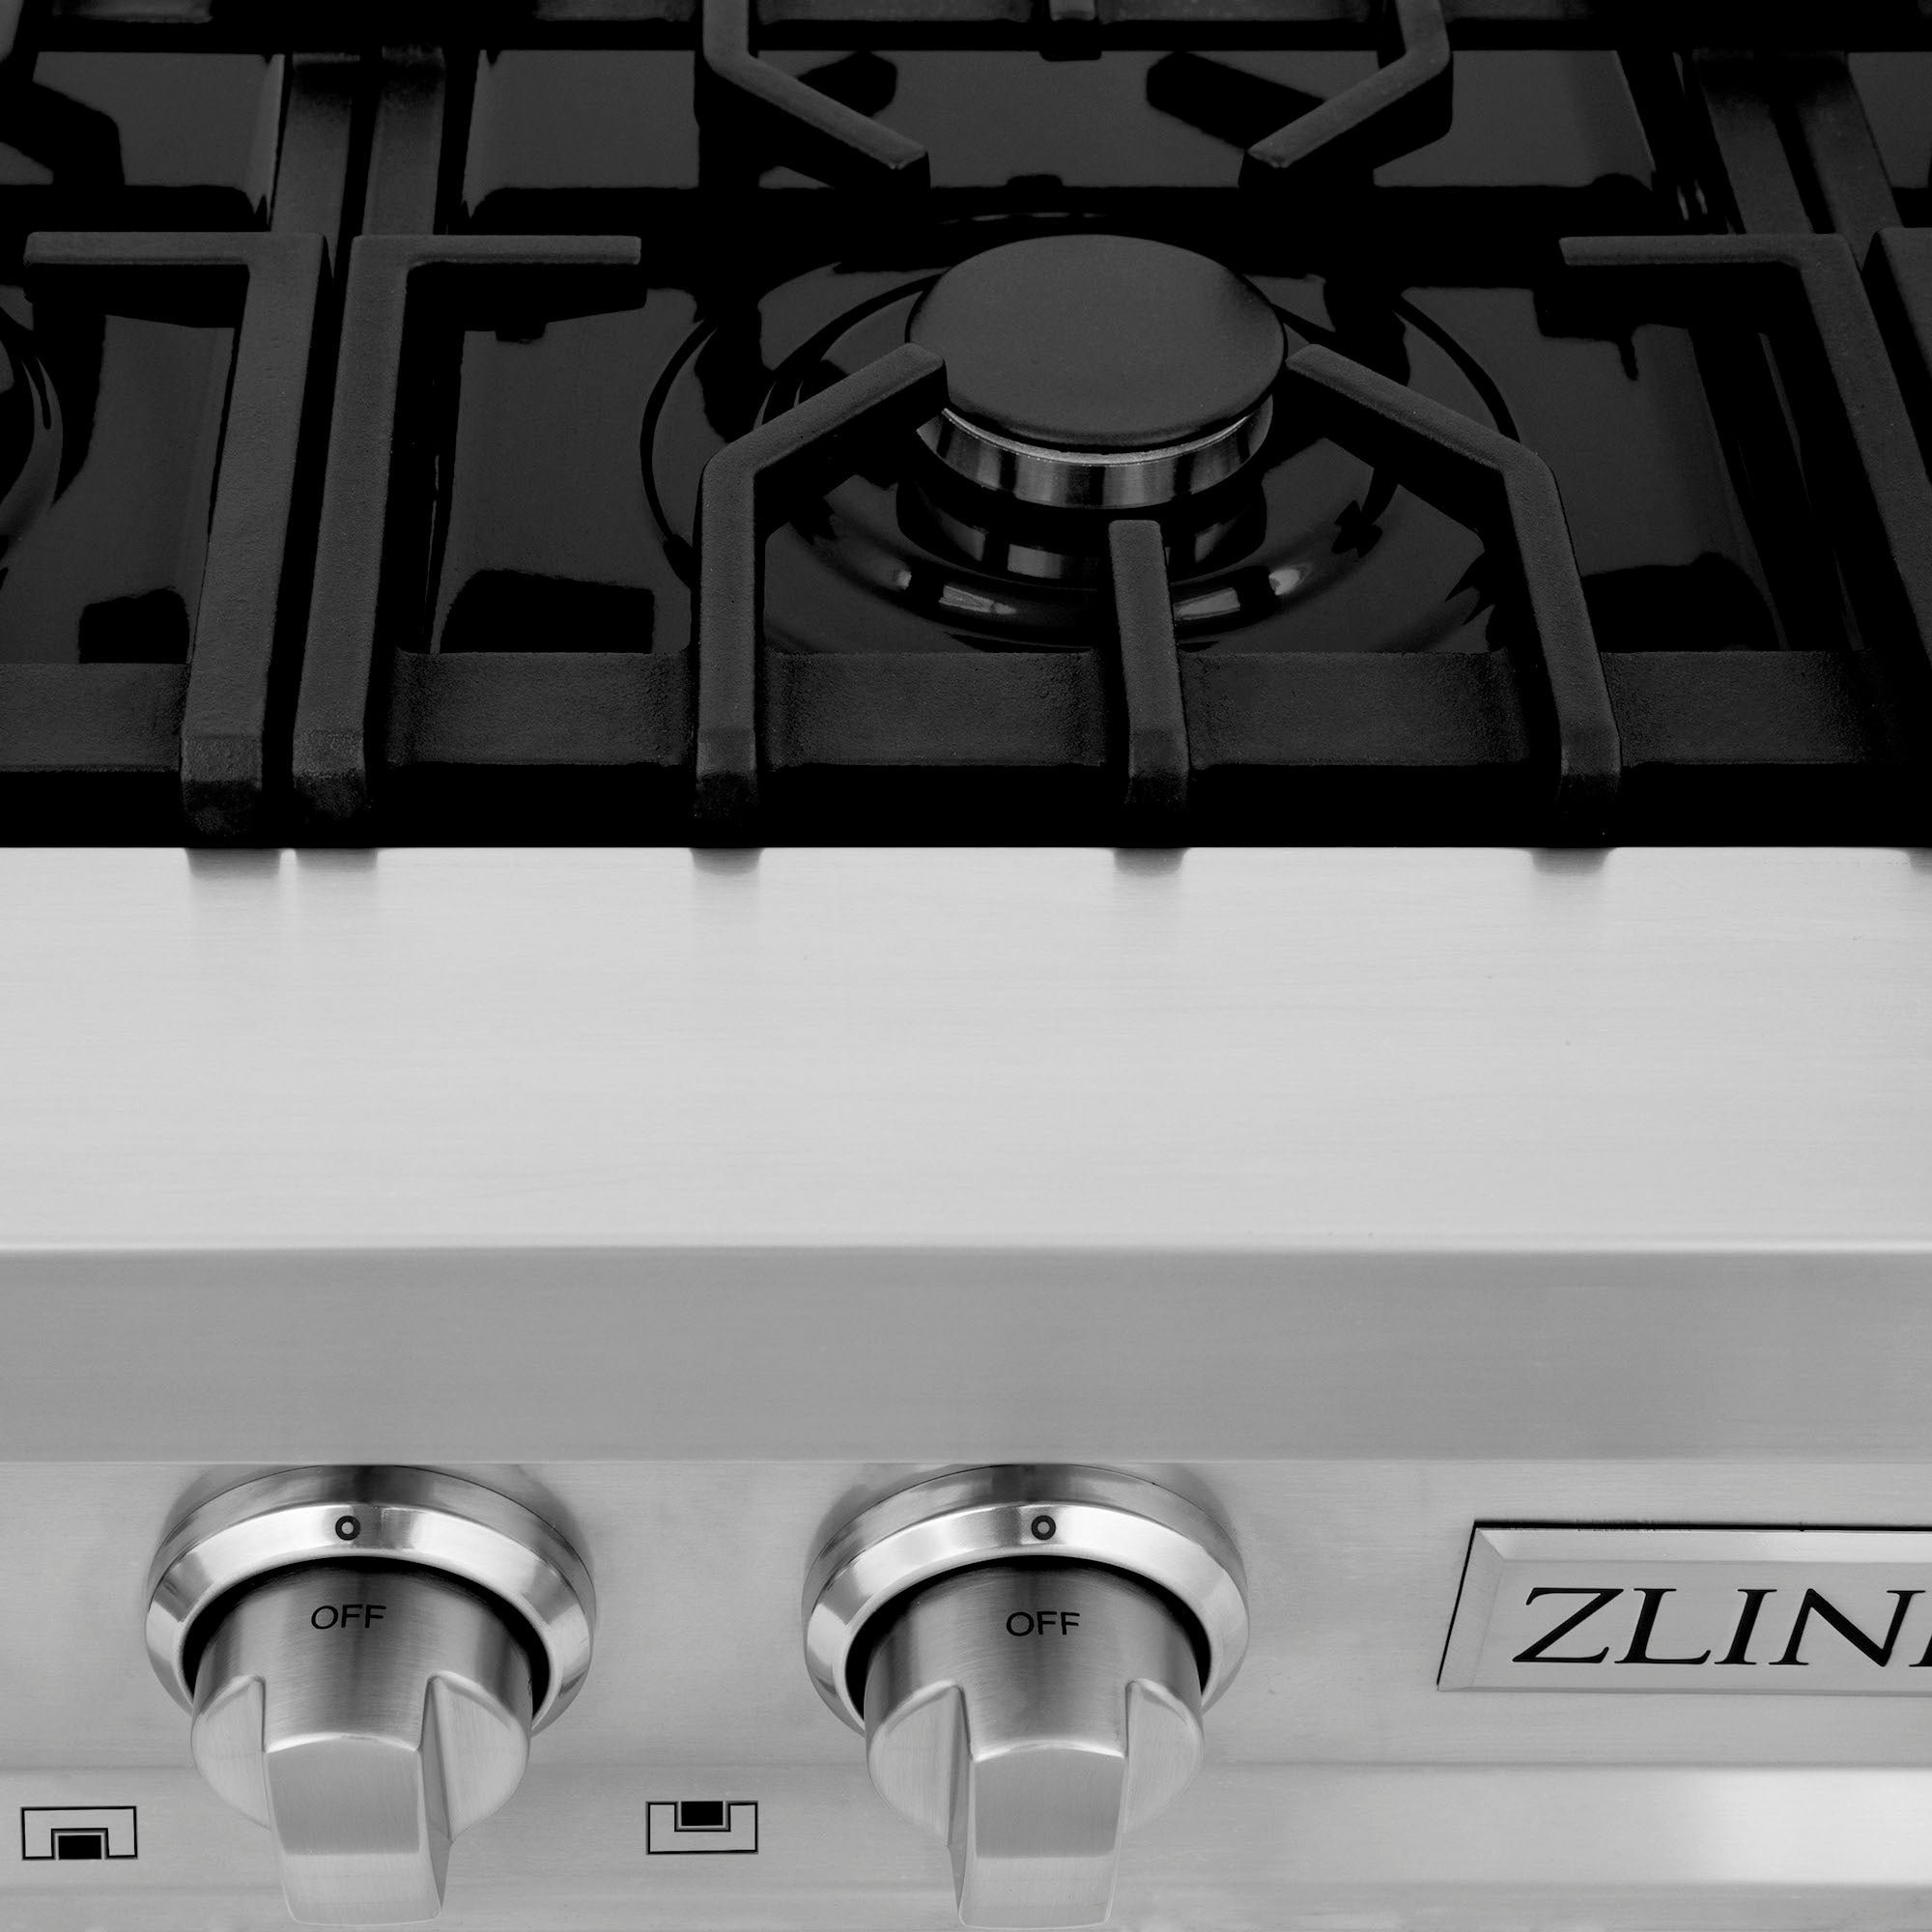 Cast iron grates and cooktop knobs on ZLINE 36 in. Stainless Steel Gas Rangetop.